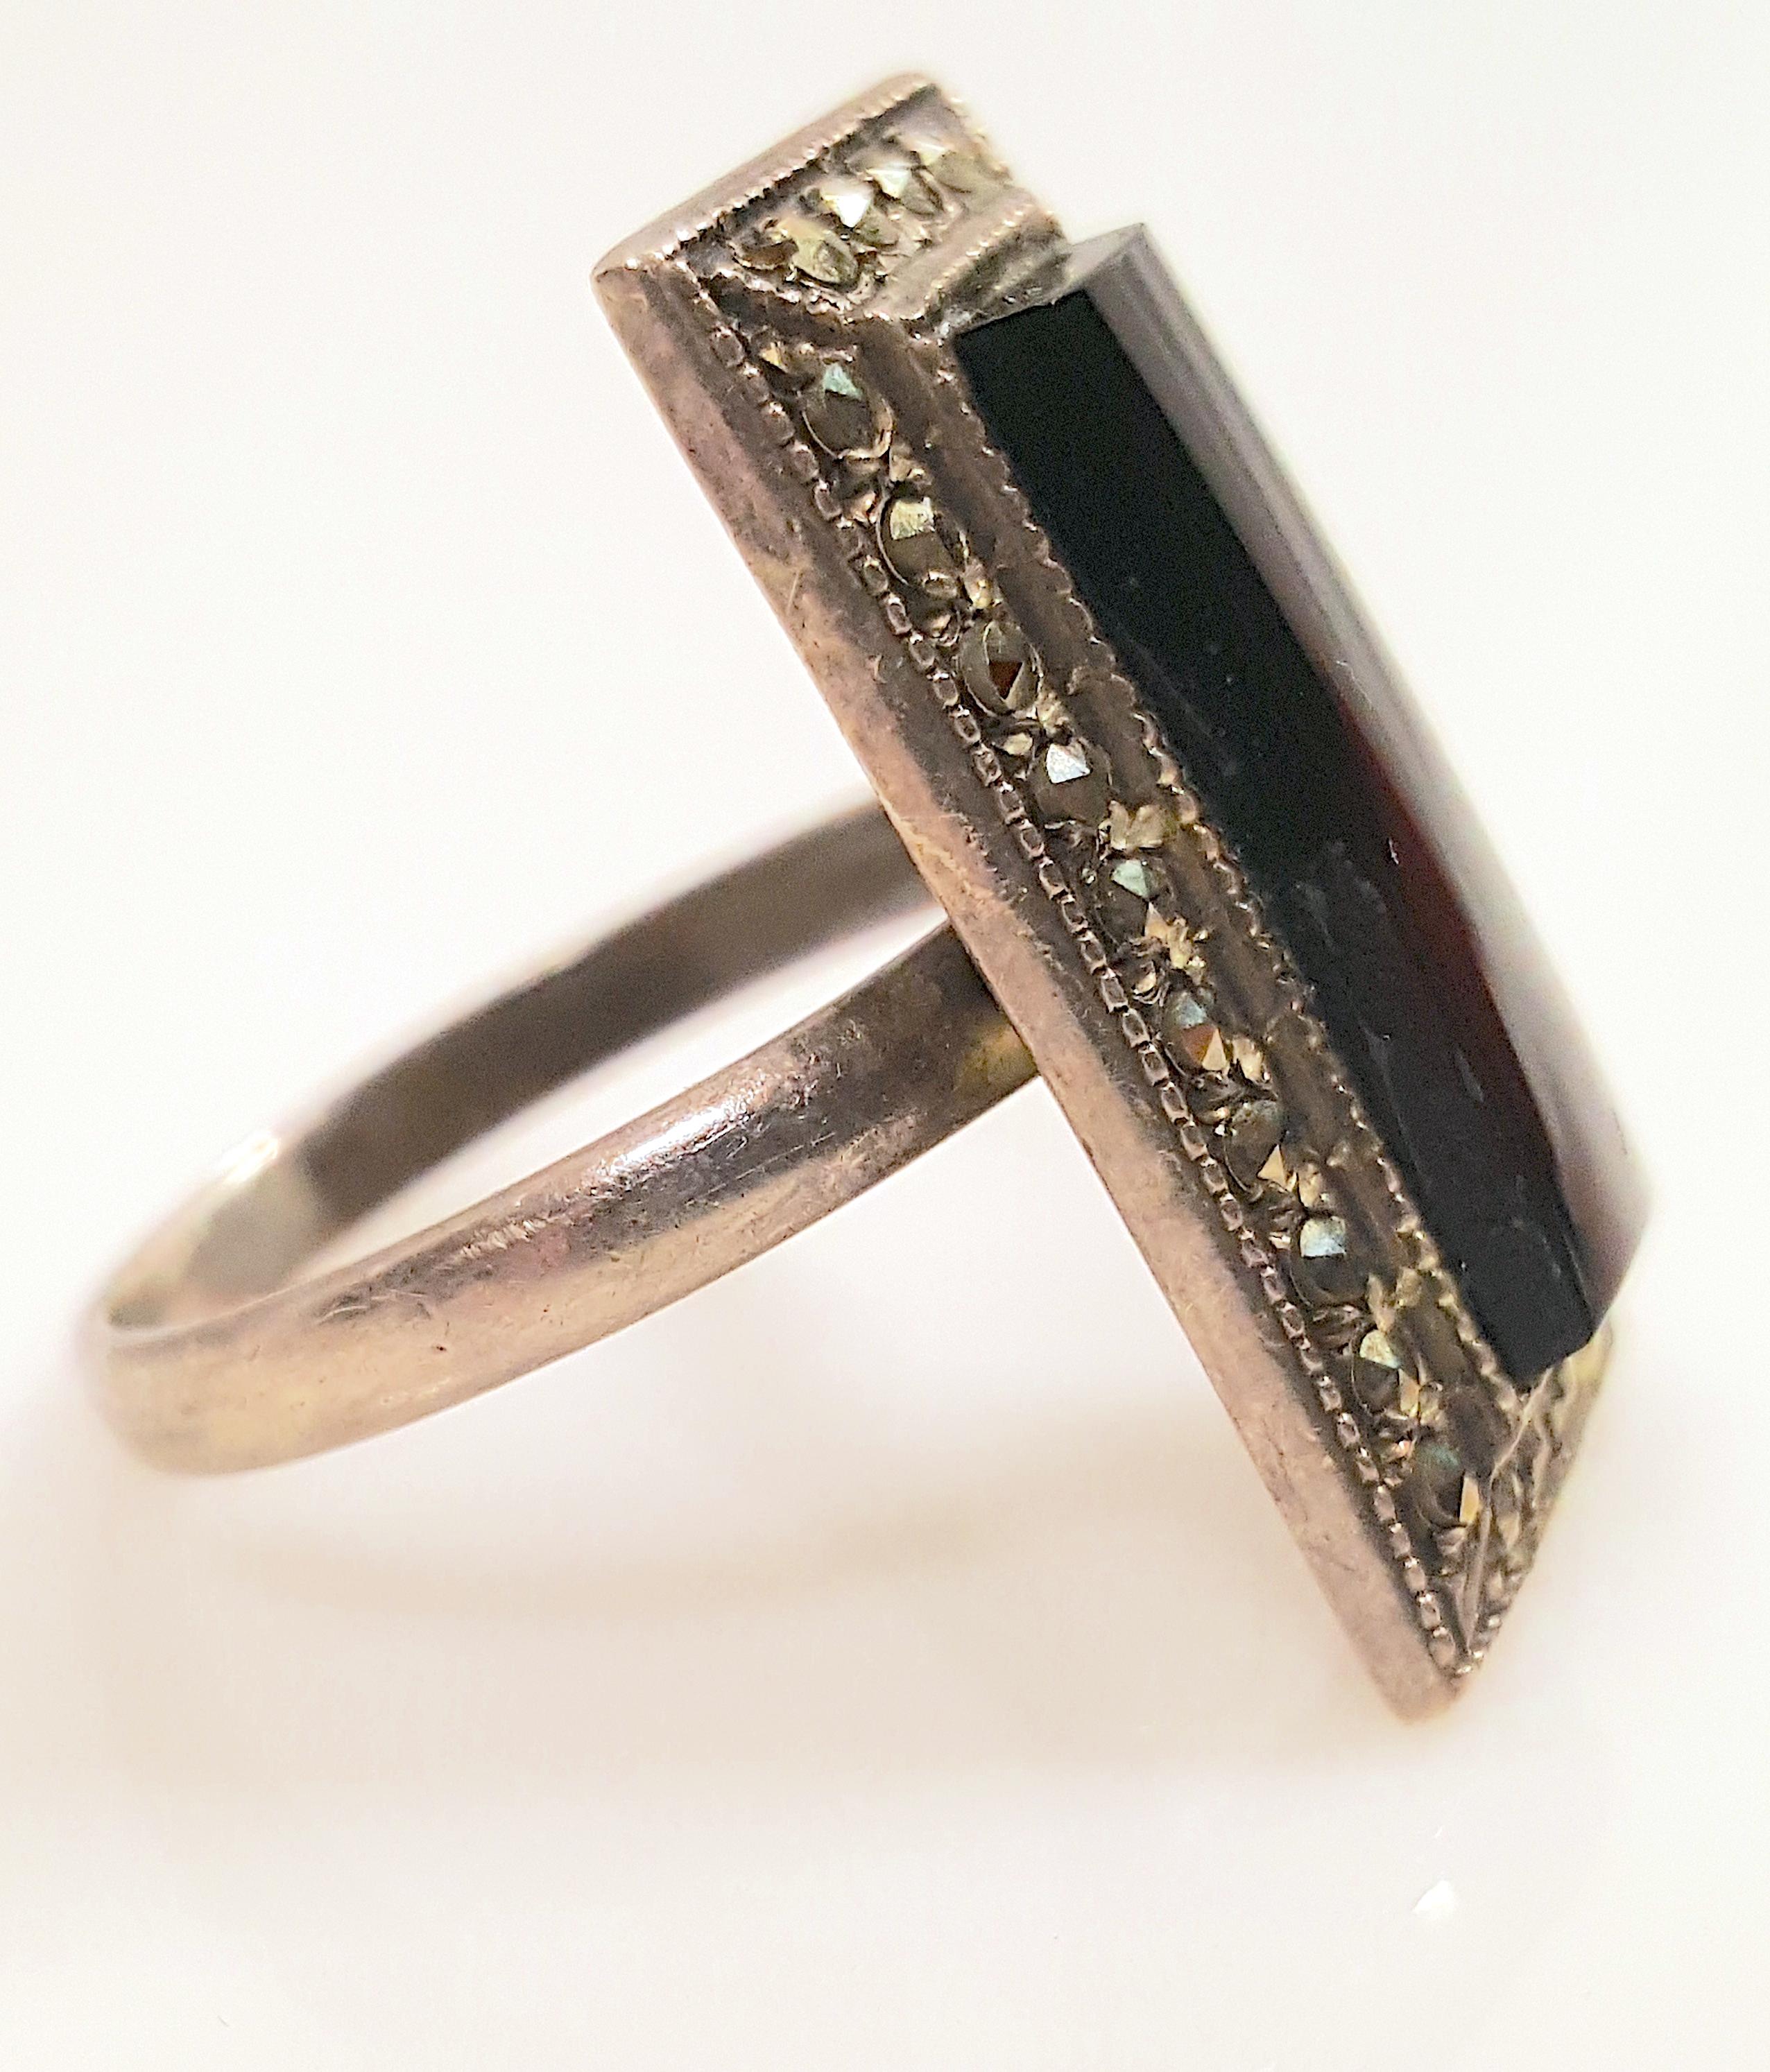 On this antique early Art Deco-period solitaire cocktail ring, a long rectangular mirror-cut black onyx is surrounded by 28 faceted marcasite stones. The American silver ring, whose face is 1 x 0.5 inches, is marked 